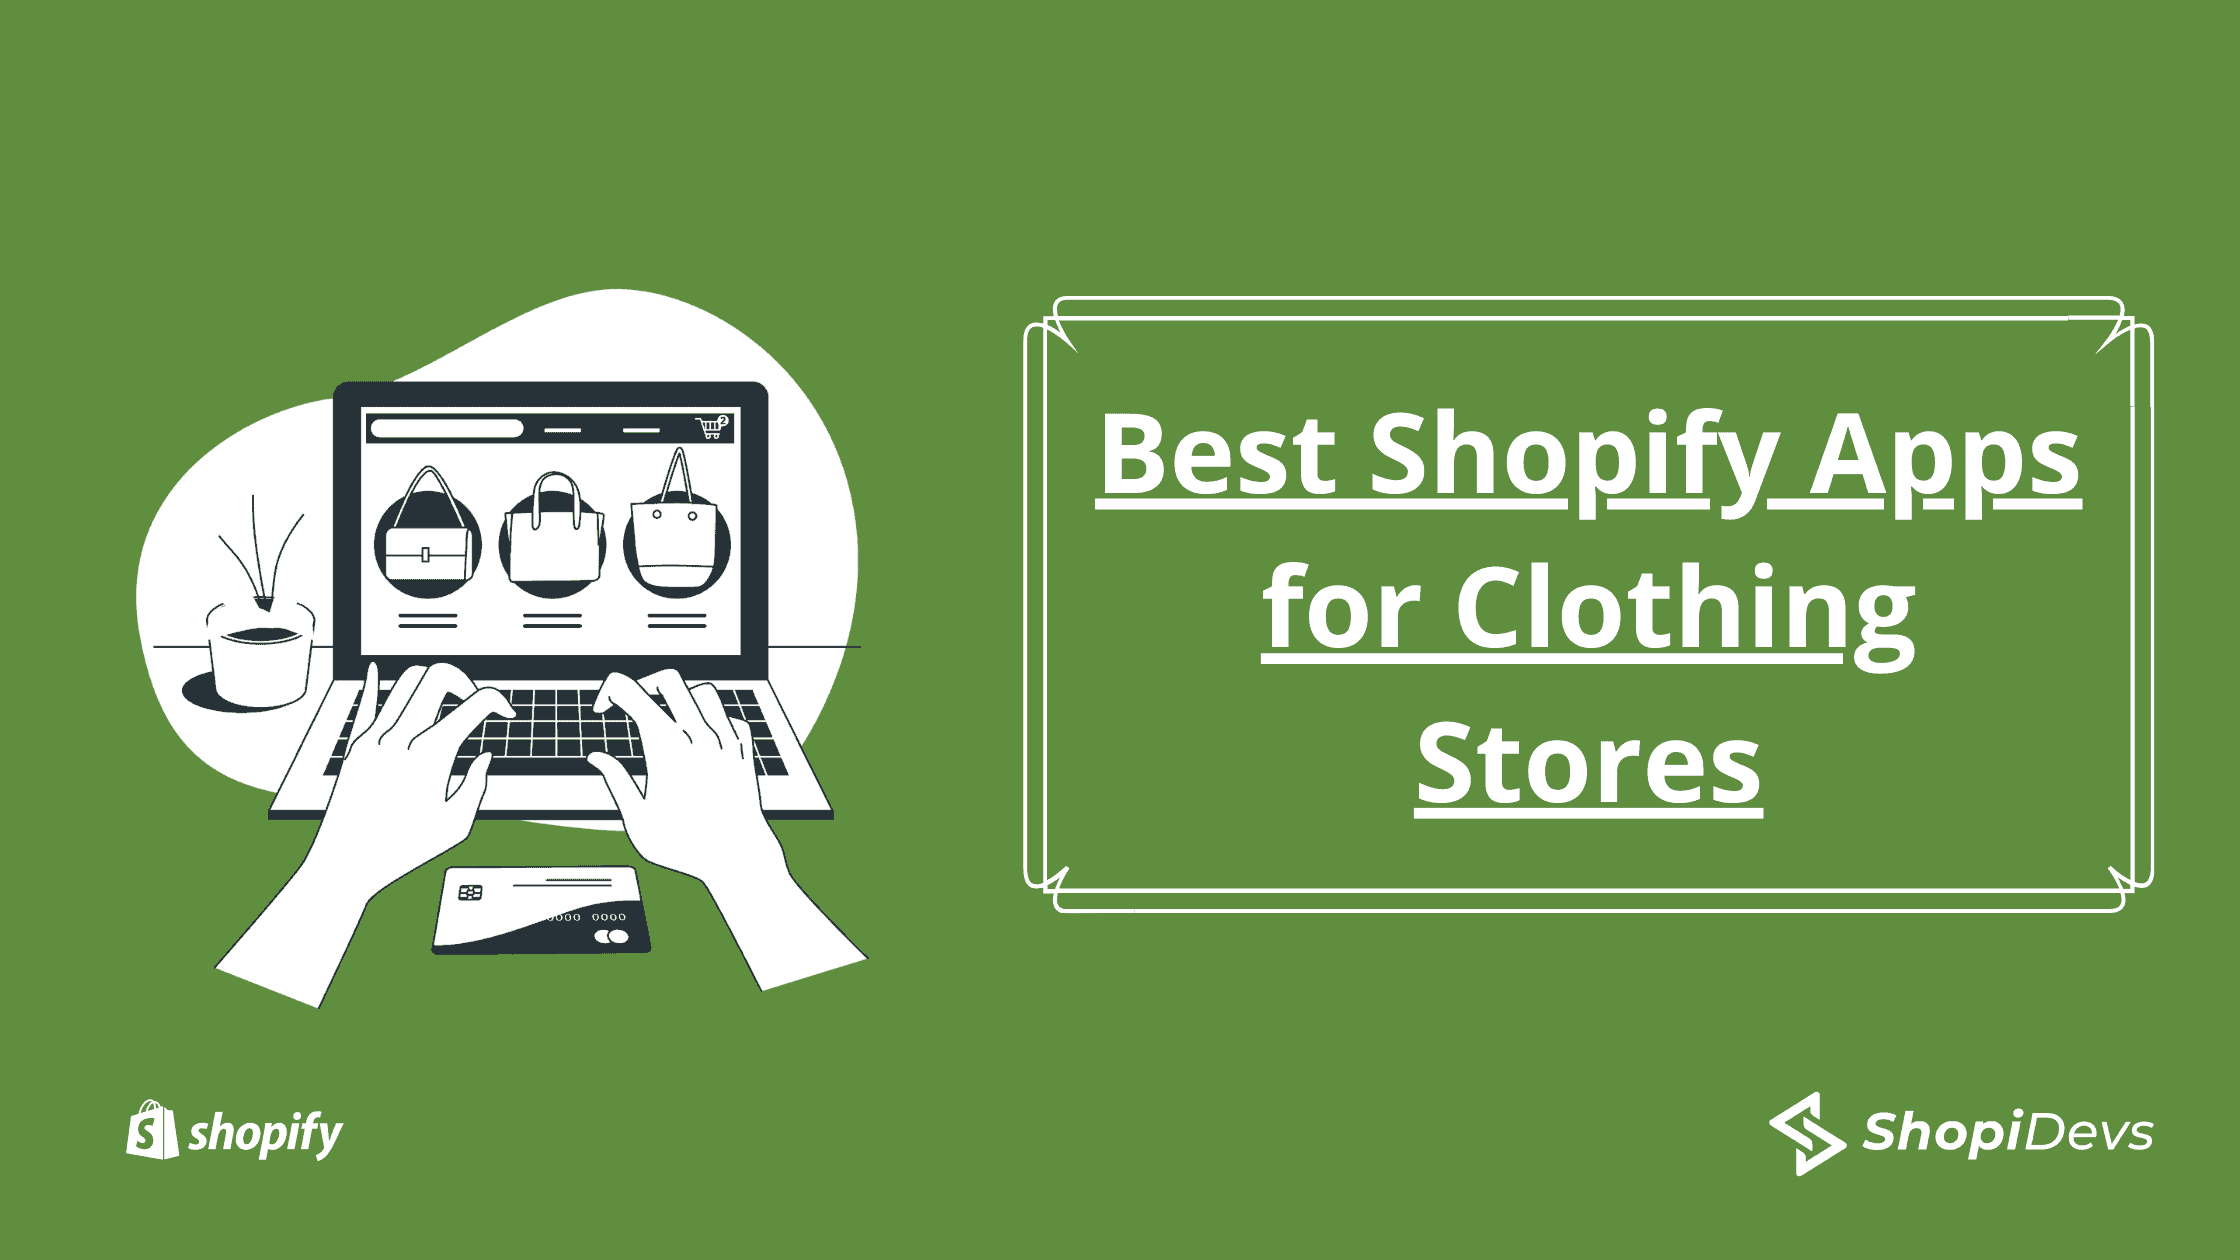 Best Shopify Apps for Clothing Stores 2